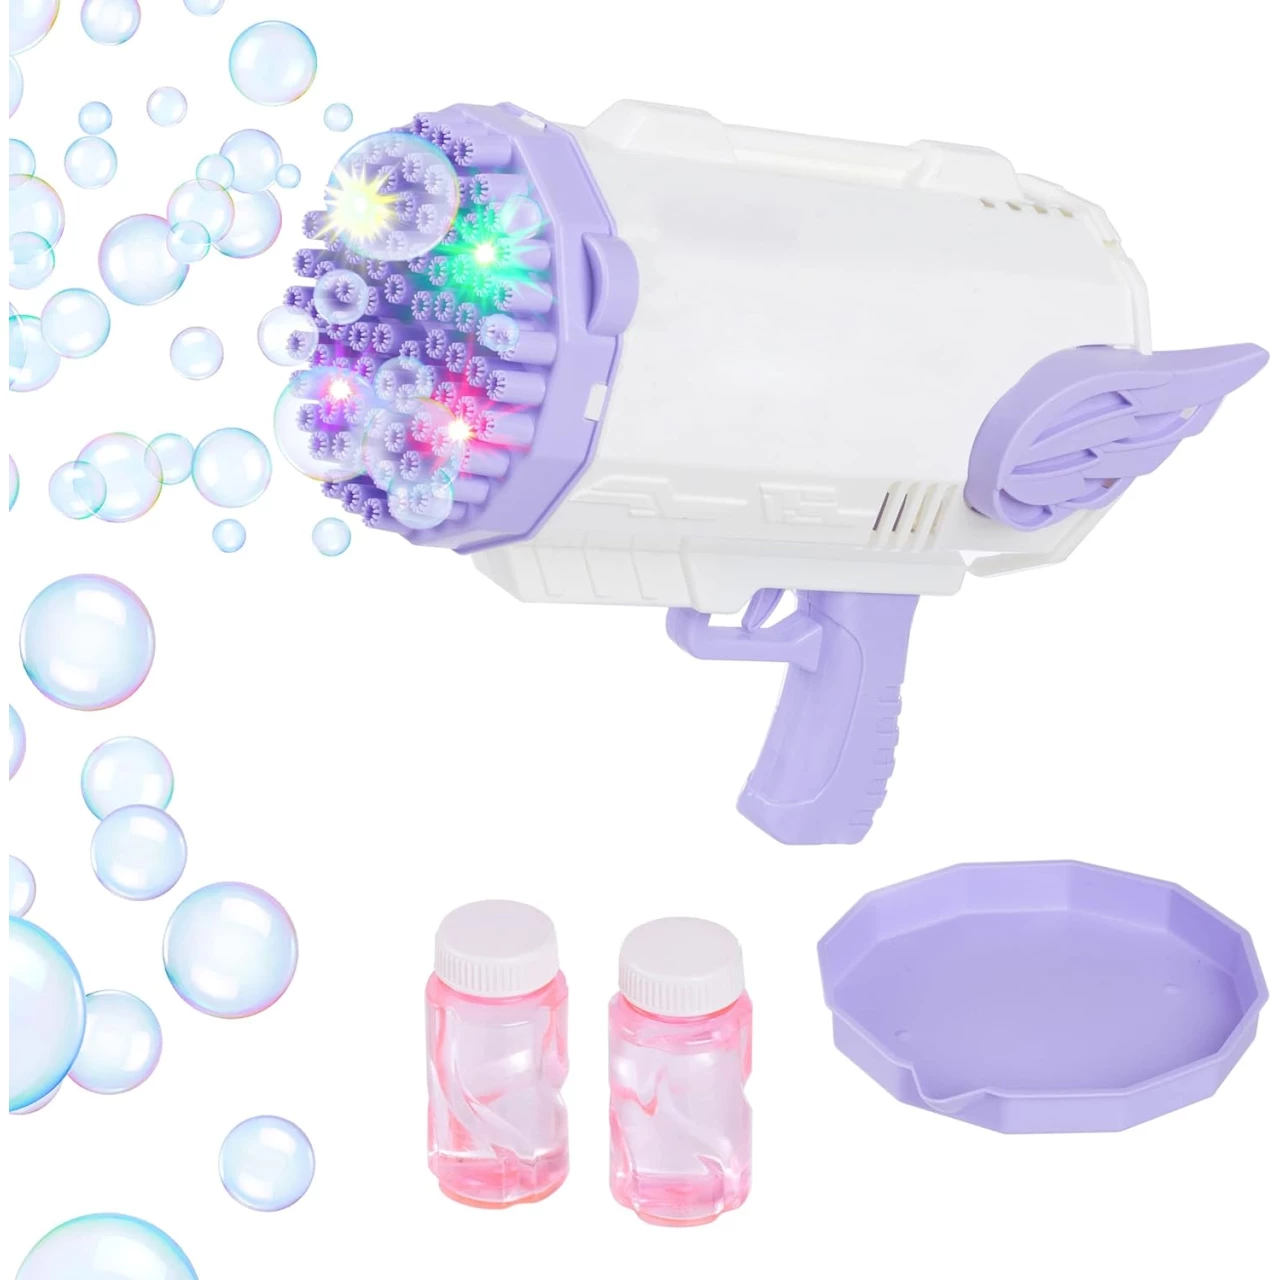 Bubble Gun with 80 Holes and Colorful LED Lights - Includes Bubble Solution - Bubbles for Kids or Parties by Hey Play